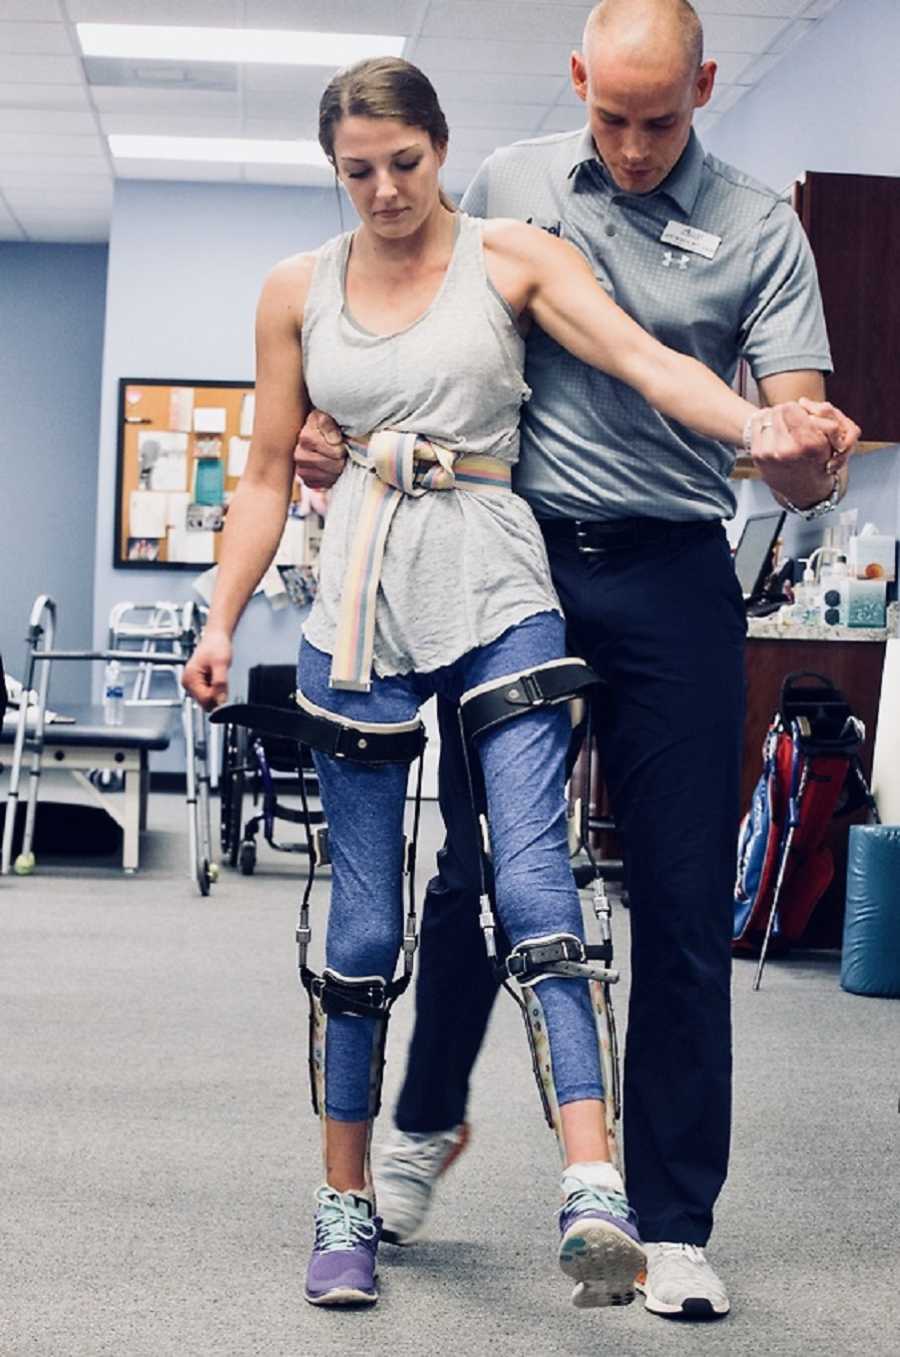 Woman in leg braces trying to walk in physical therapy with boyfriend